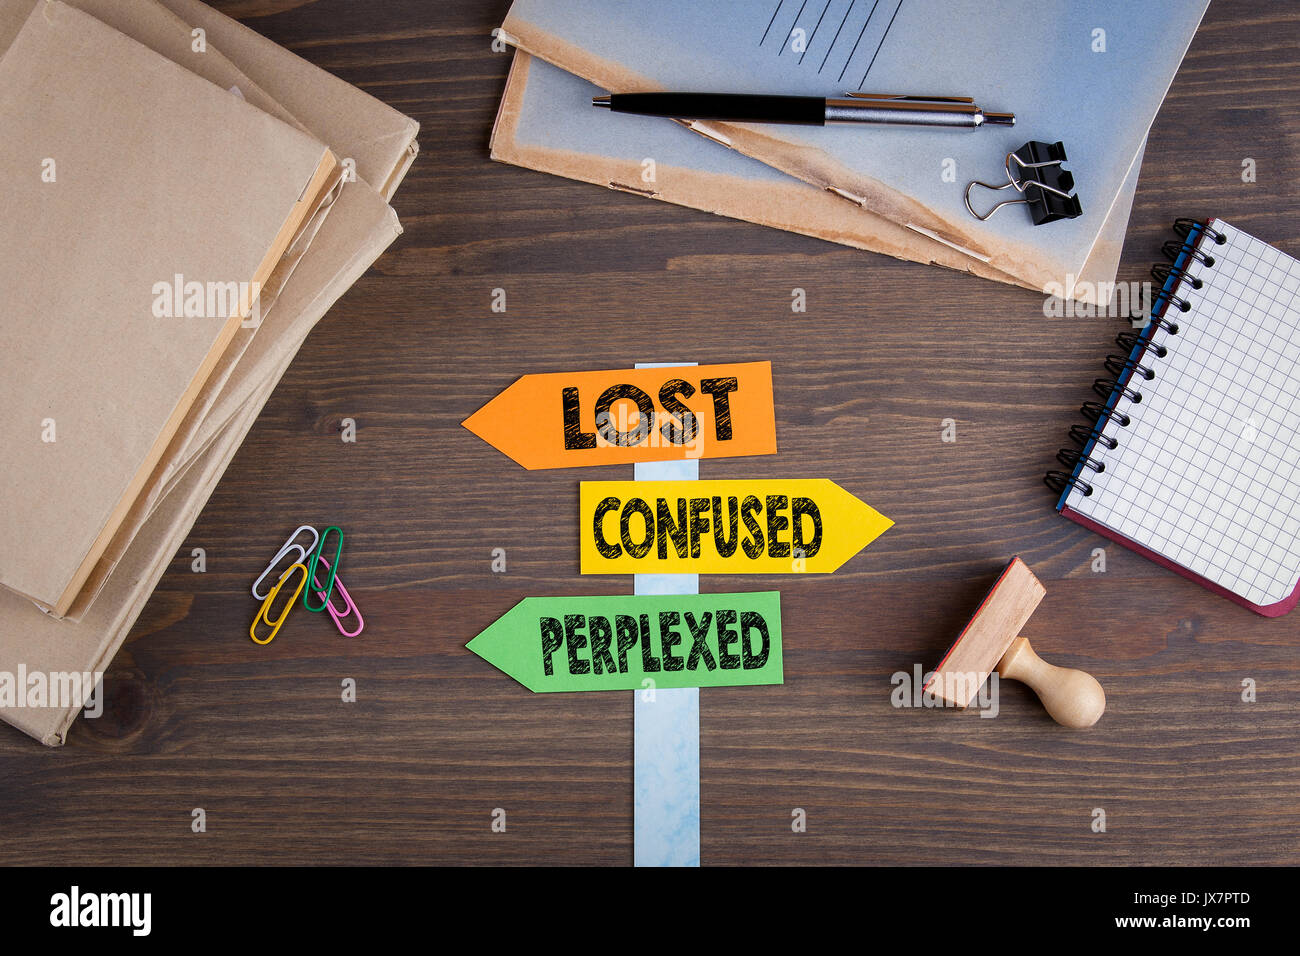 Lost, confused and perplexed concept. Paper signpost on a wooden desk. Stock Photo